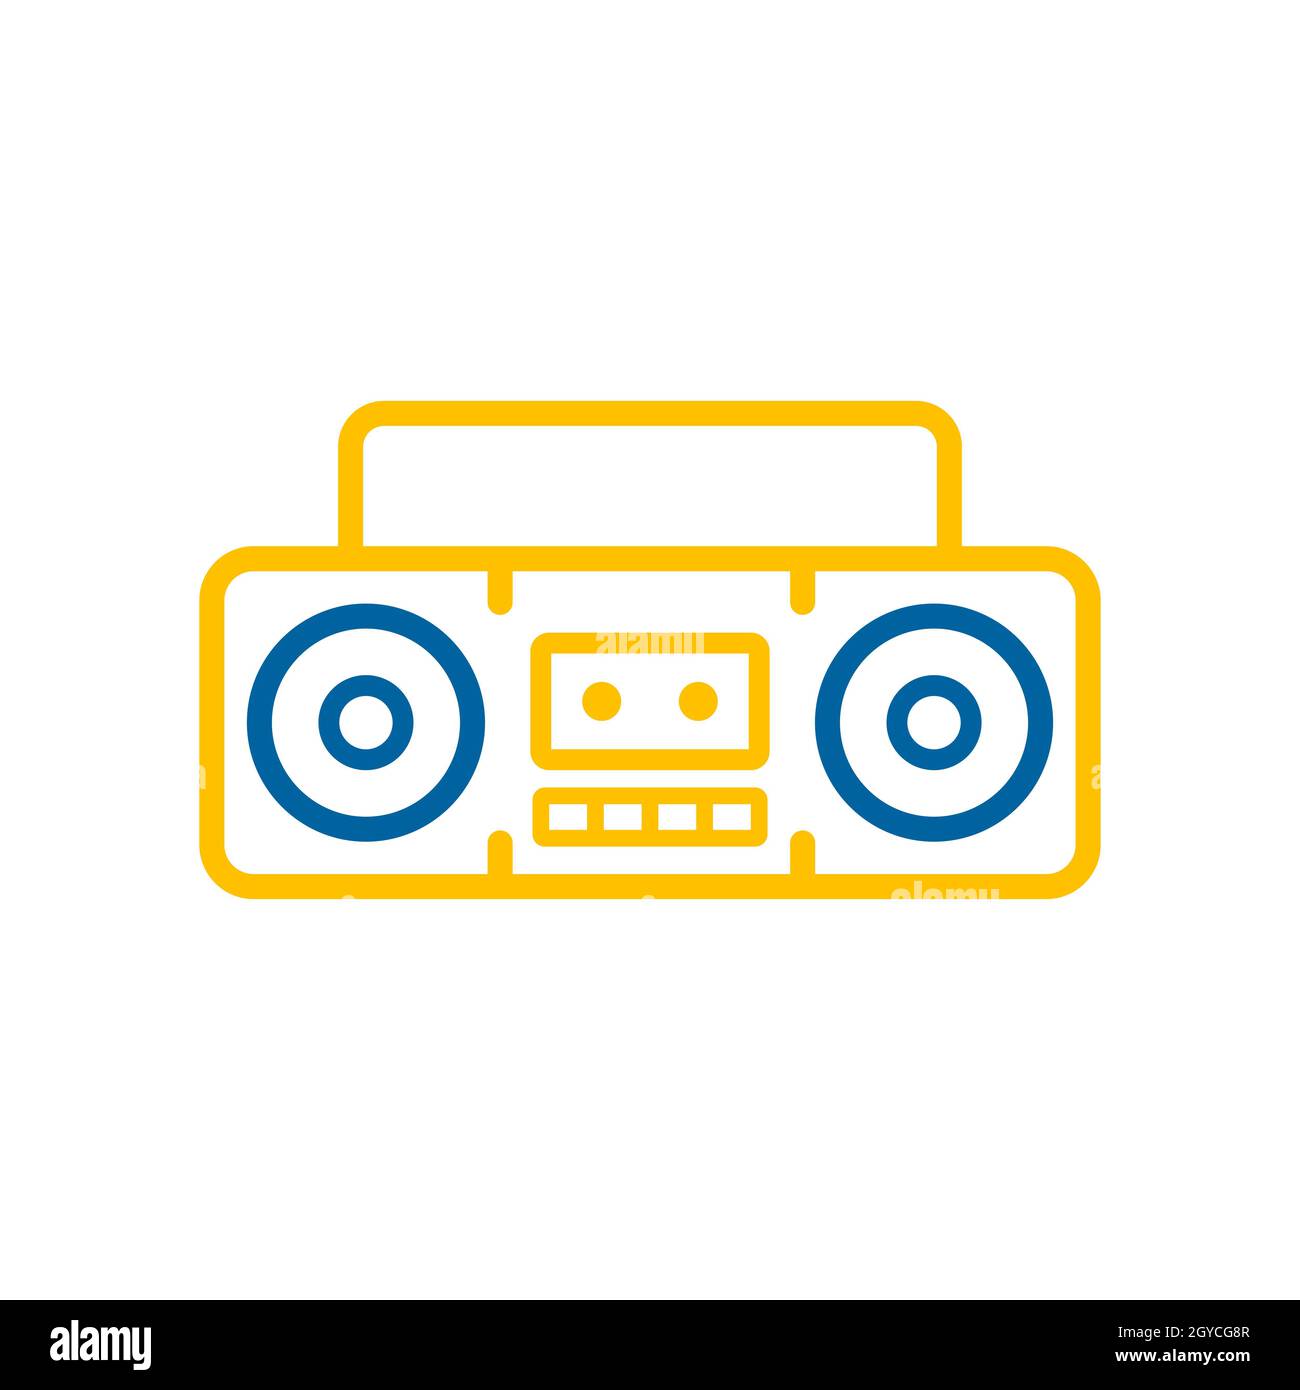 colorful boombox vector